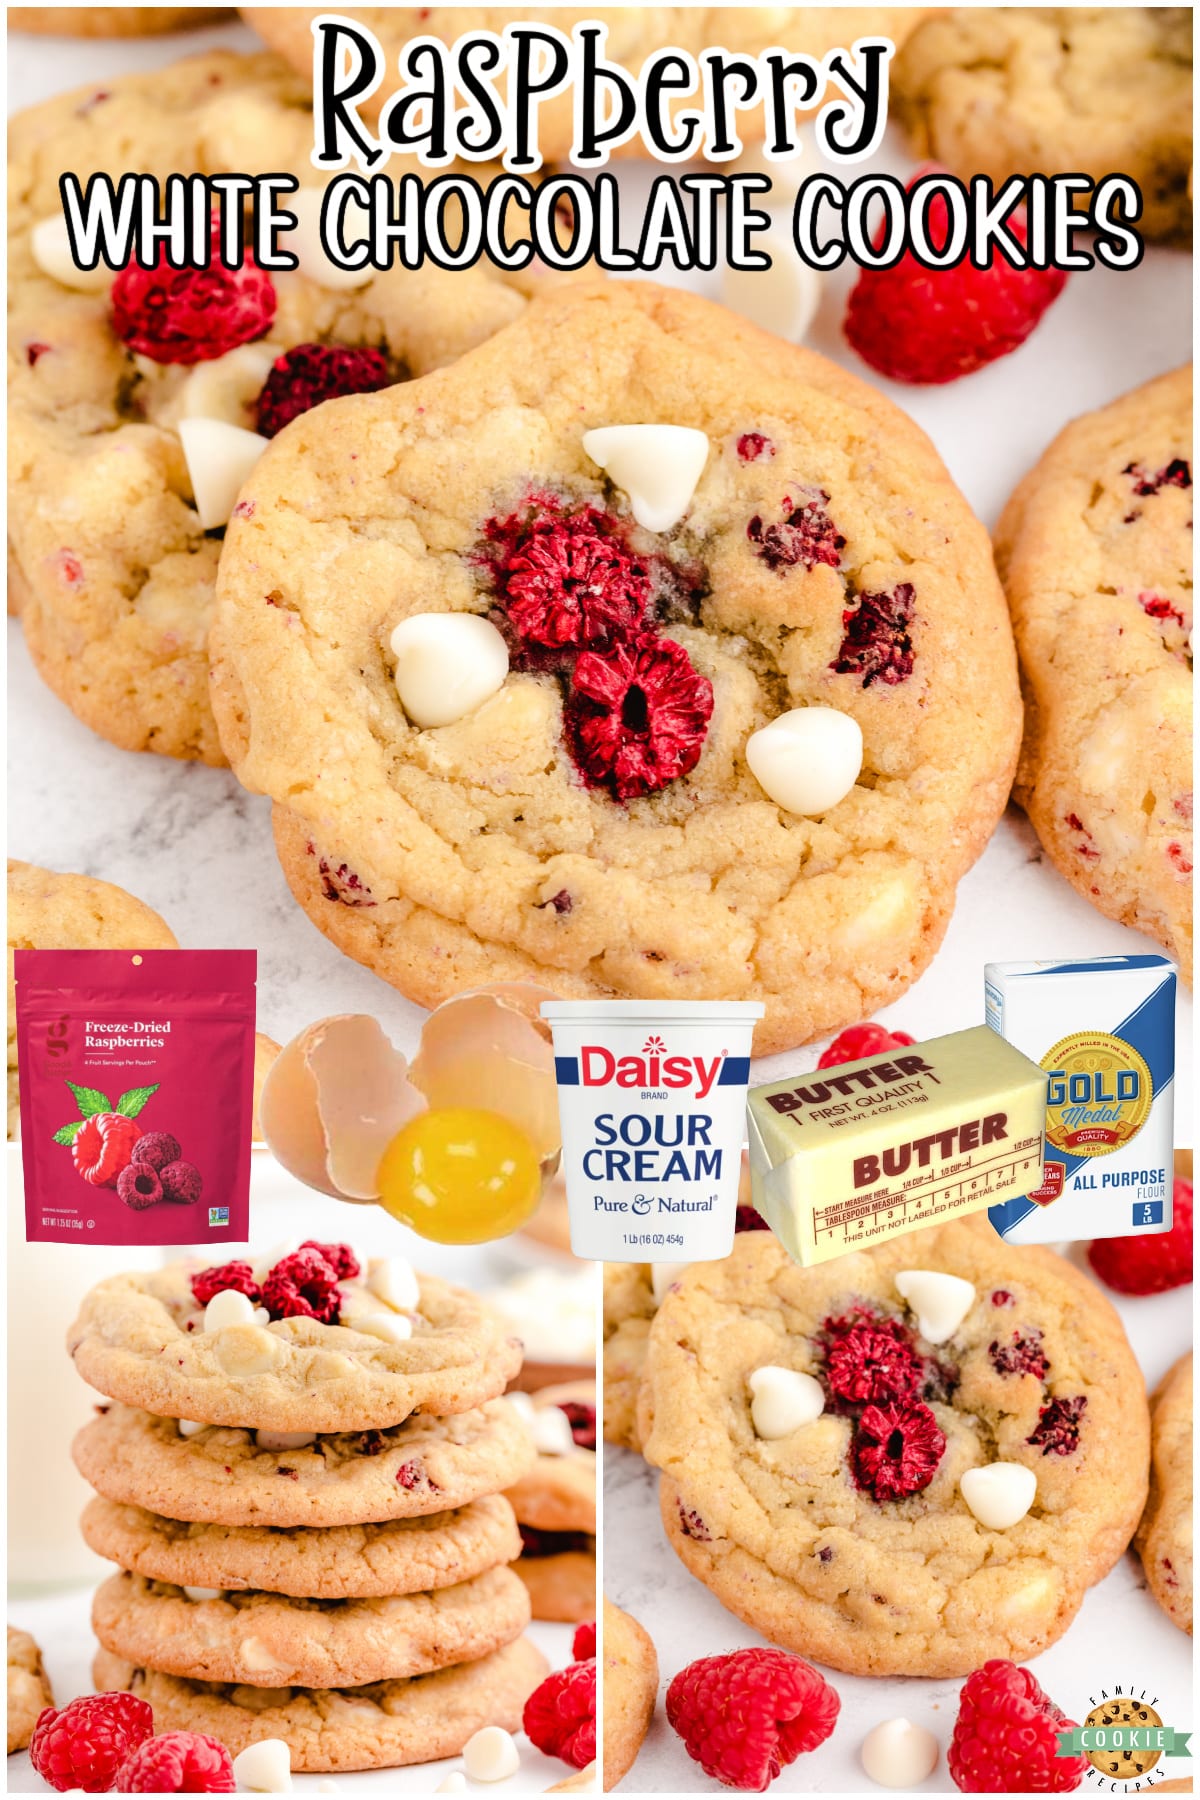 Raspberry White Chocolate Cookies are soft & buttery cookies packed with white chocolate chips and raspberries! These incredible white chocolate chip cookies have fantastic flavor, buttery crisp edges & bright raspberries throughout.